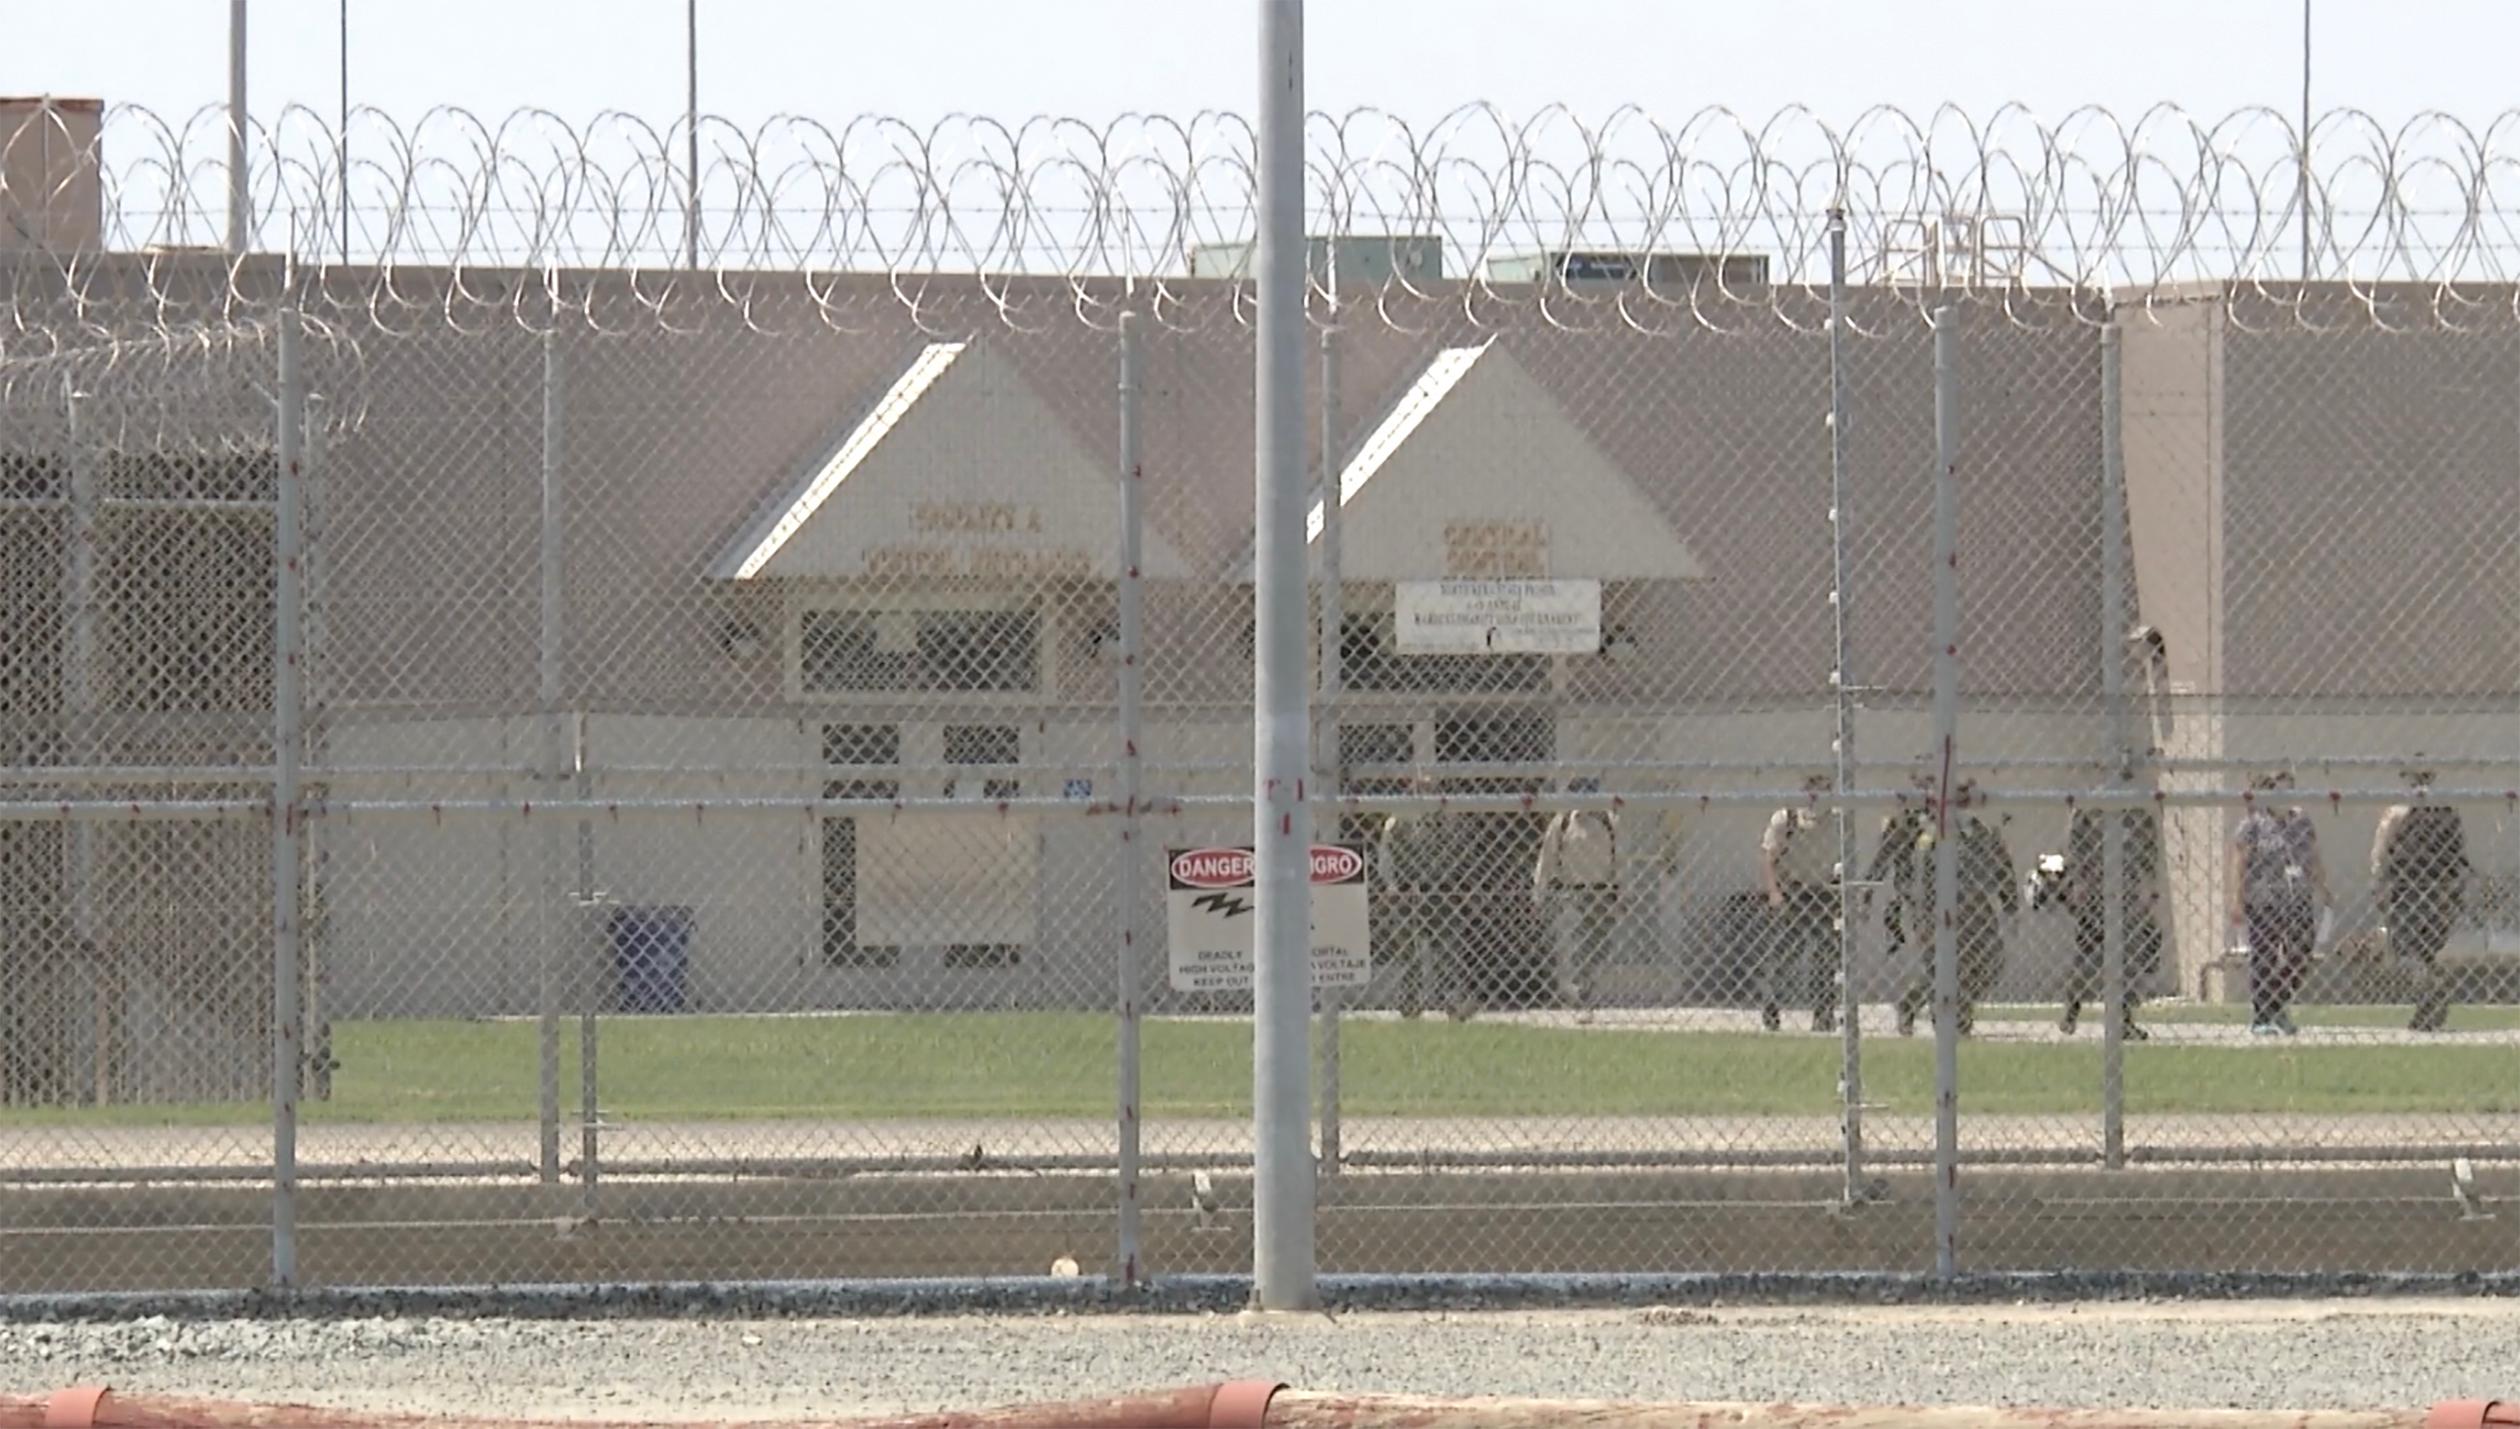 Convicted rapper Tory Lanez' home for the next 10 years - North Kern State Prison, California. 